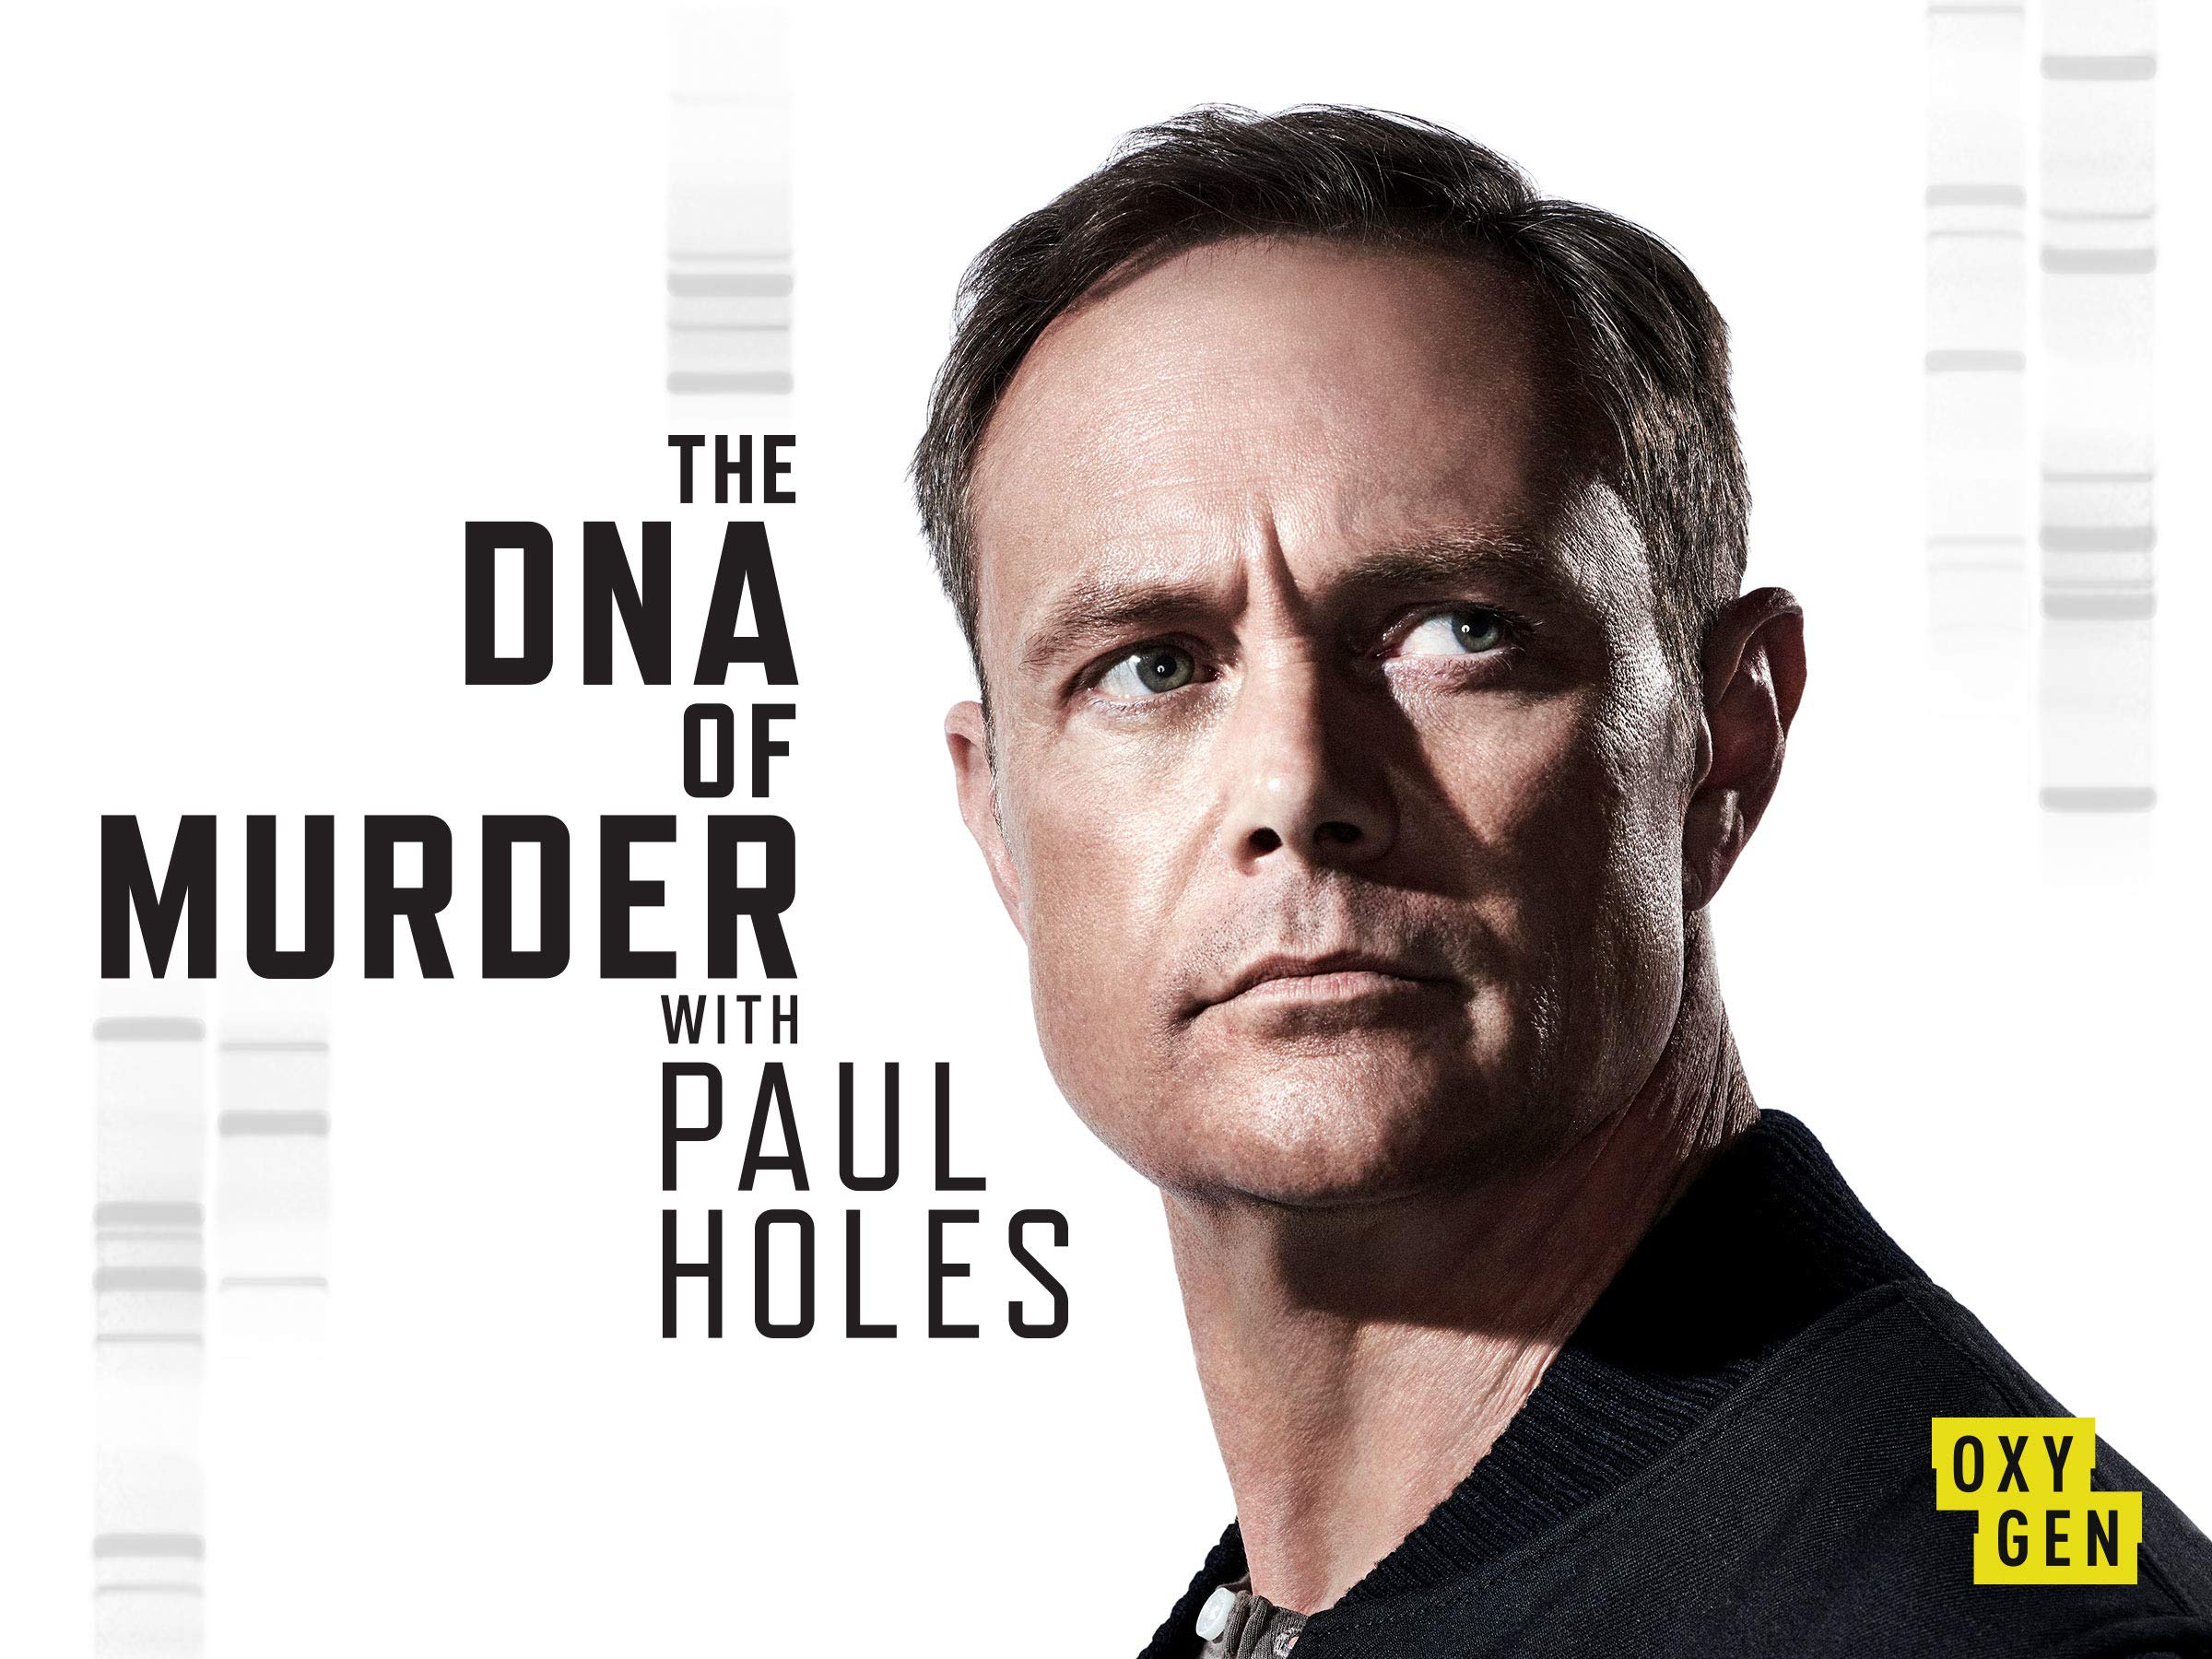 The DNA of Murder with Paul Holes (Oxygen)